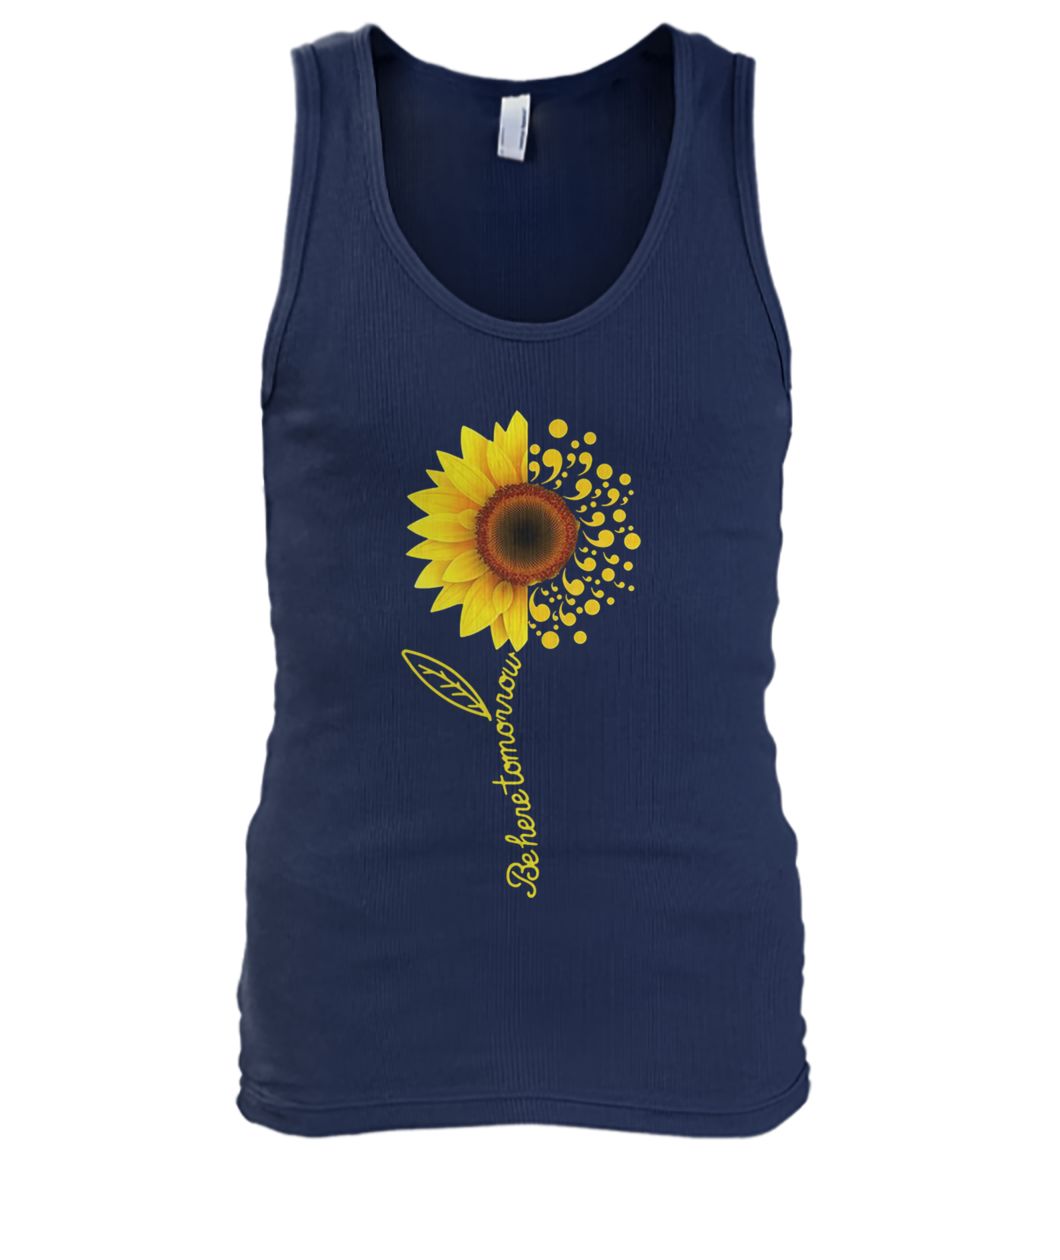 Comma sunflower be here tomorrow men's tank top